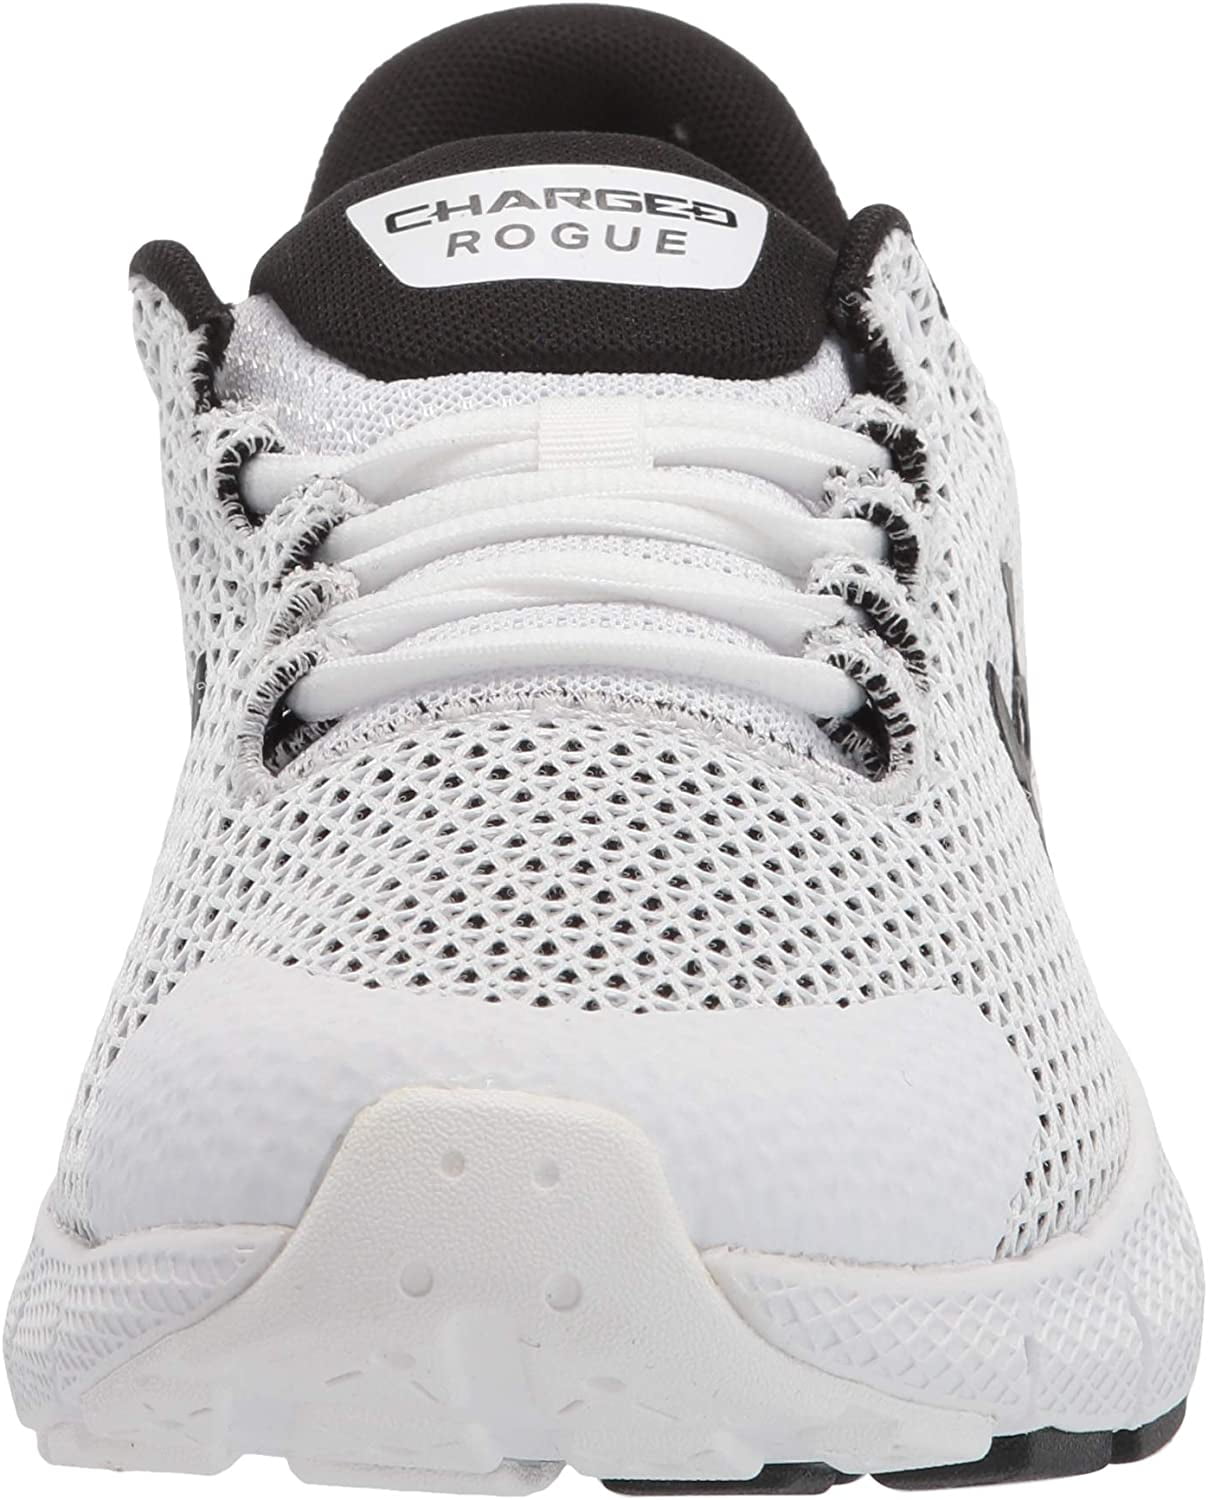 Under Armour Charged Rogue 2.5 Running Shoes